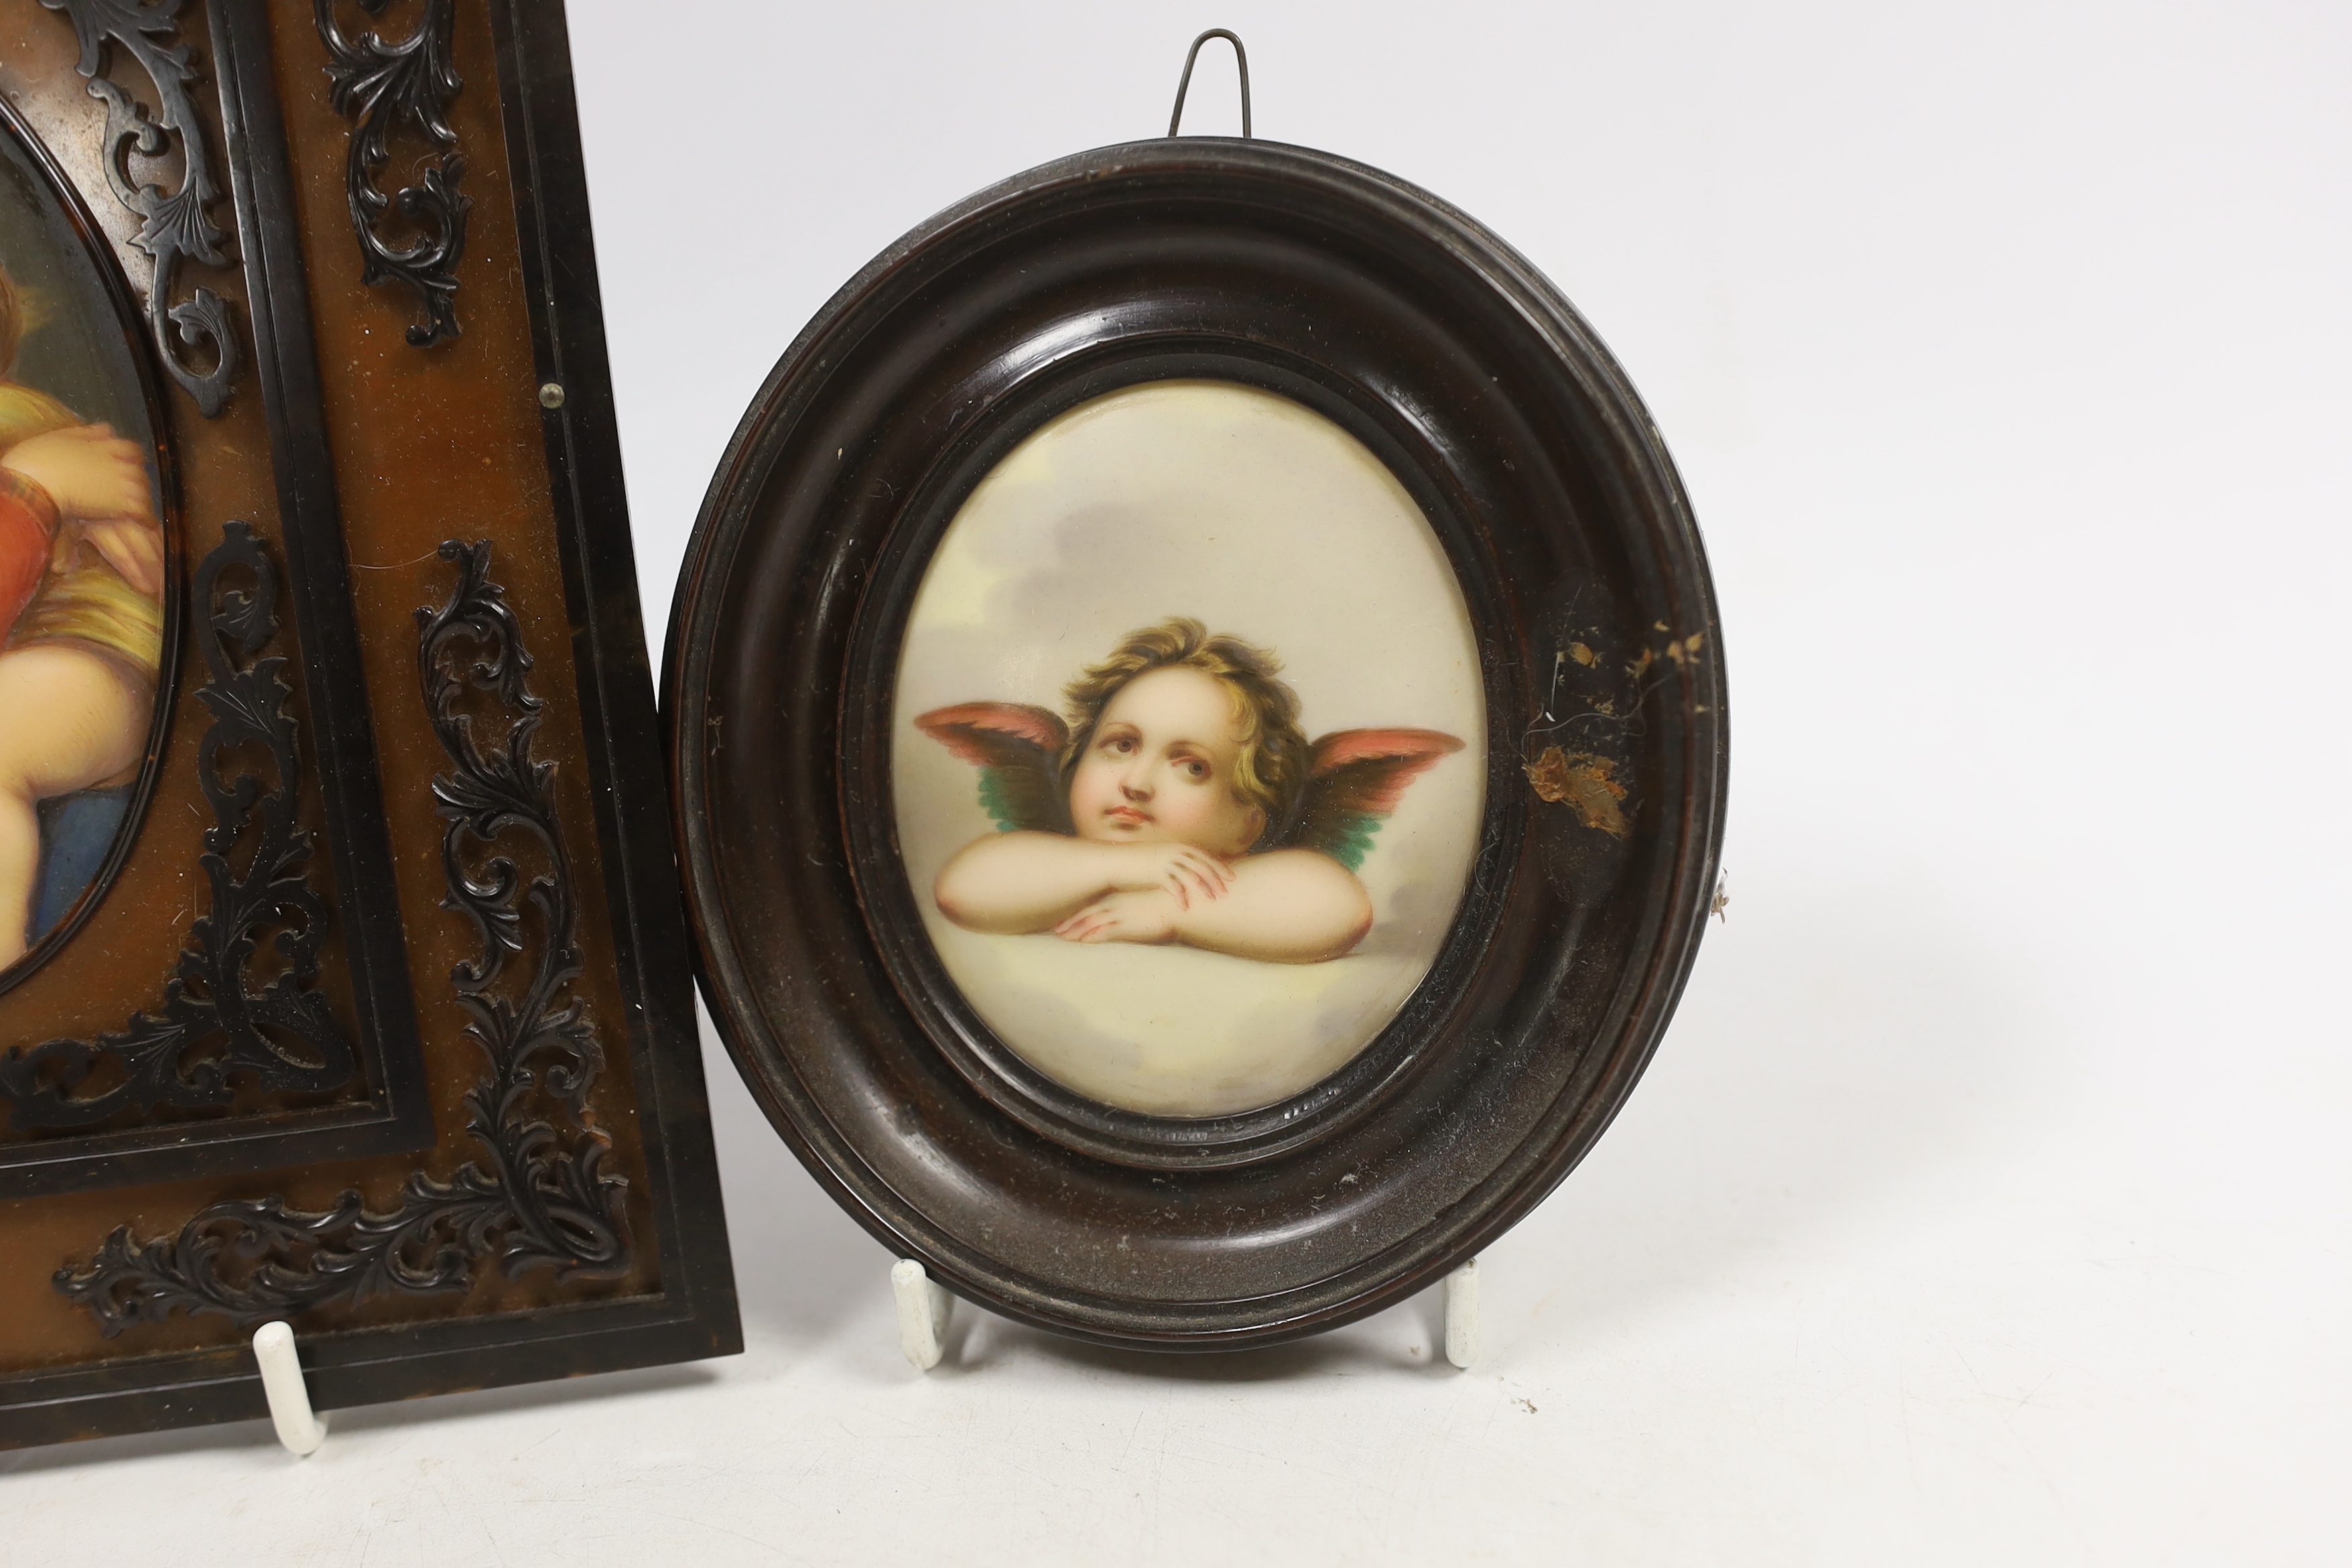 An oval porcelain plaque of mother and child in an ornate frame and a smaller circular porcelain plaque of a putti, mother and child plaque 10.5cm high